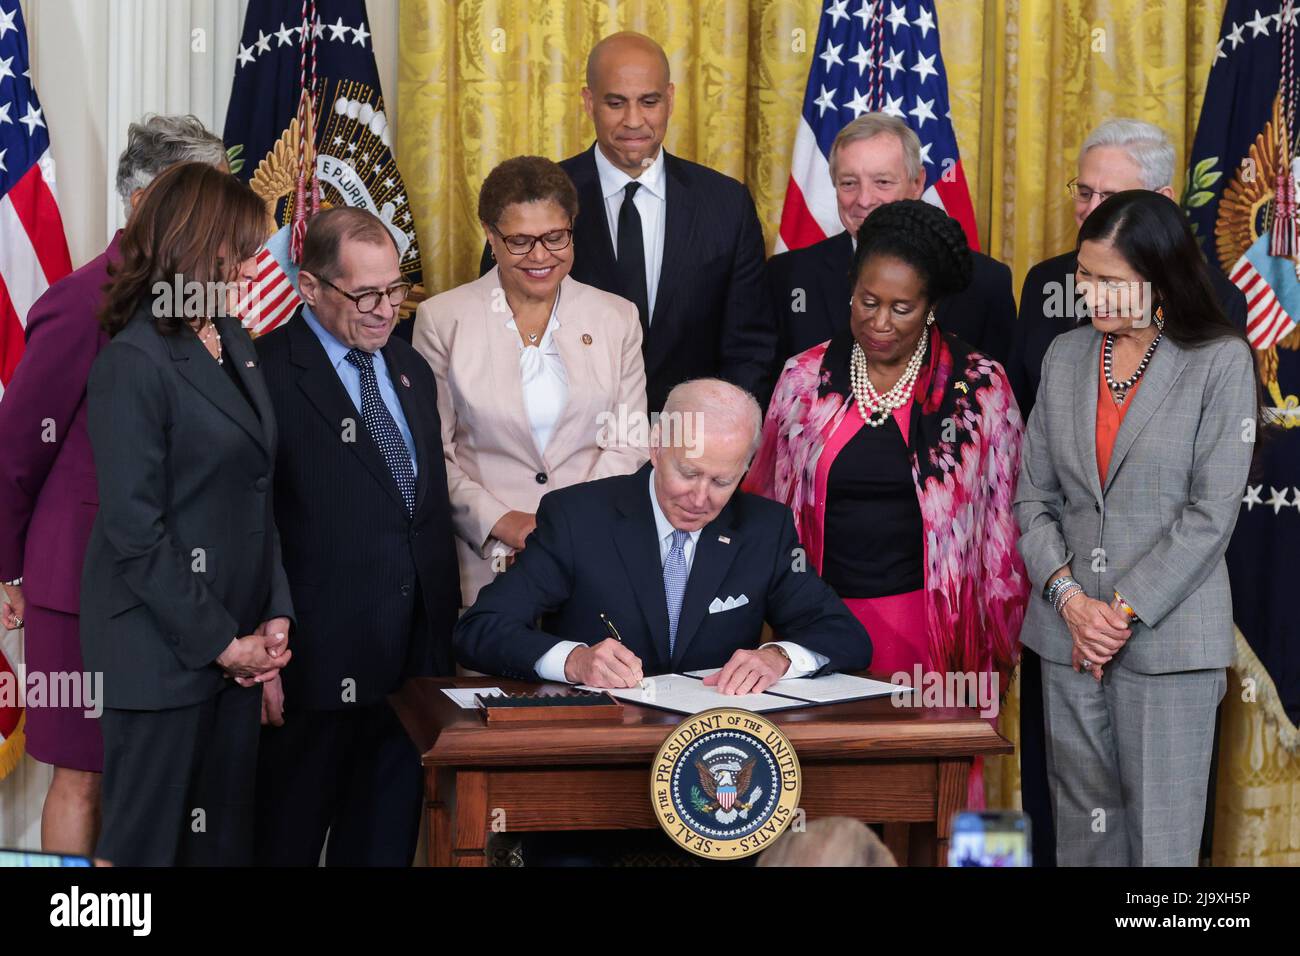 President Joe Biden signs a historic Executive Order to advance effective, accountable policing and strengthen public safety during an event held in the East Room of The White House in Washington, DC on May 25, 2022. Photo by Oliver Contreras/UPI Credit: UPI/Alamy Live News Stock Photo